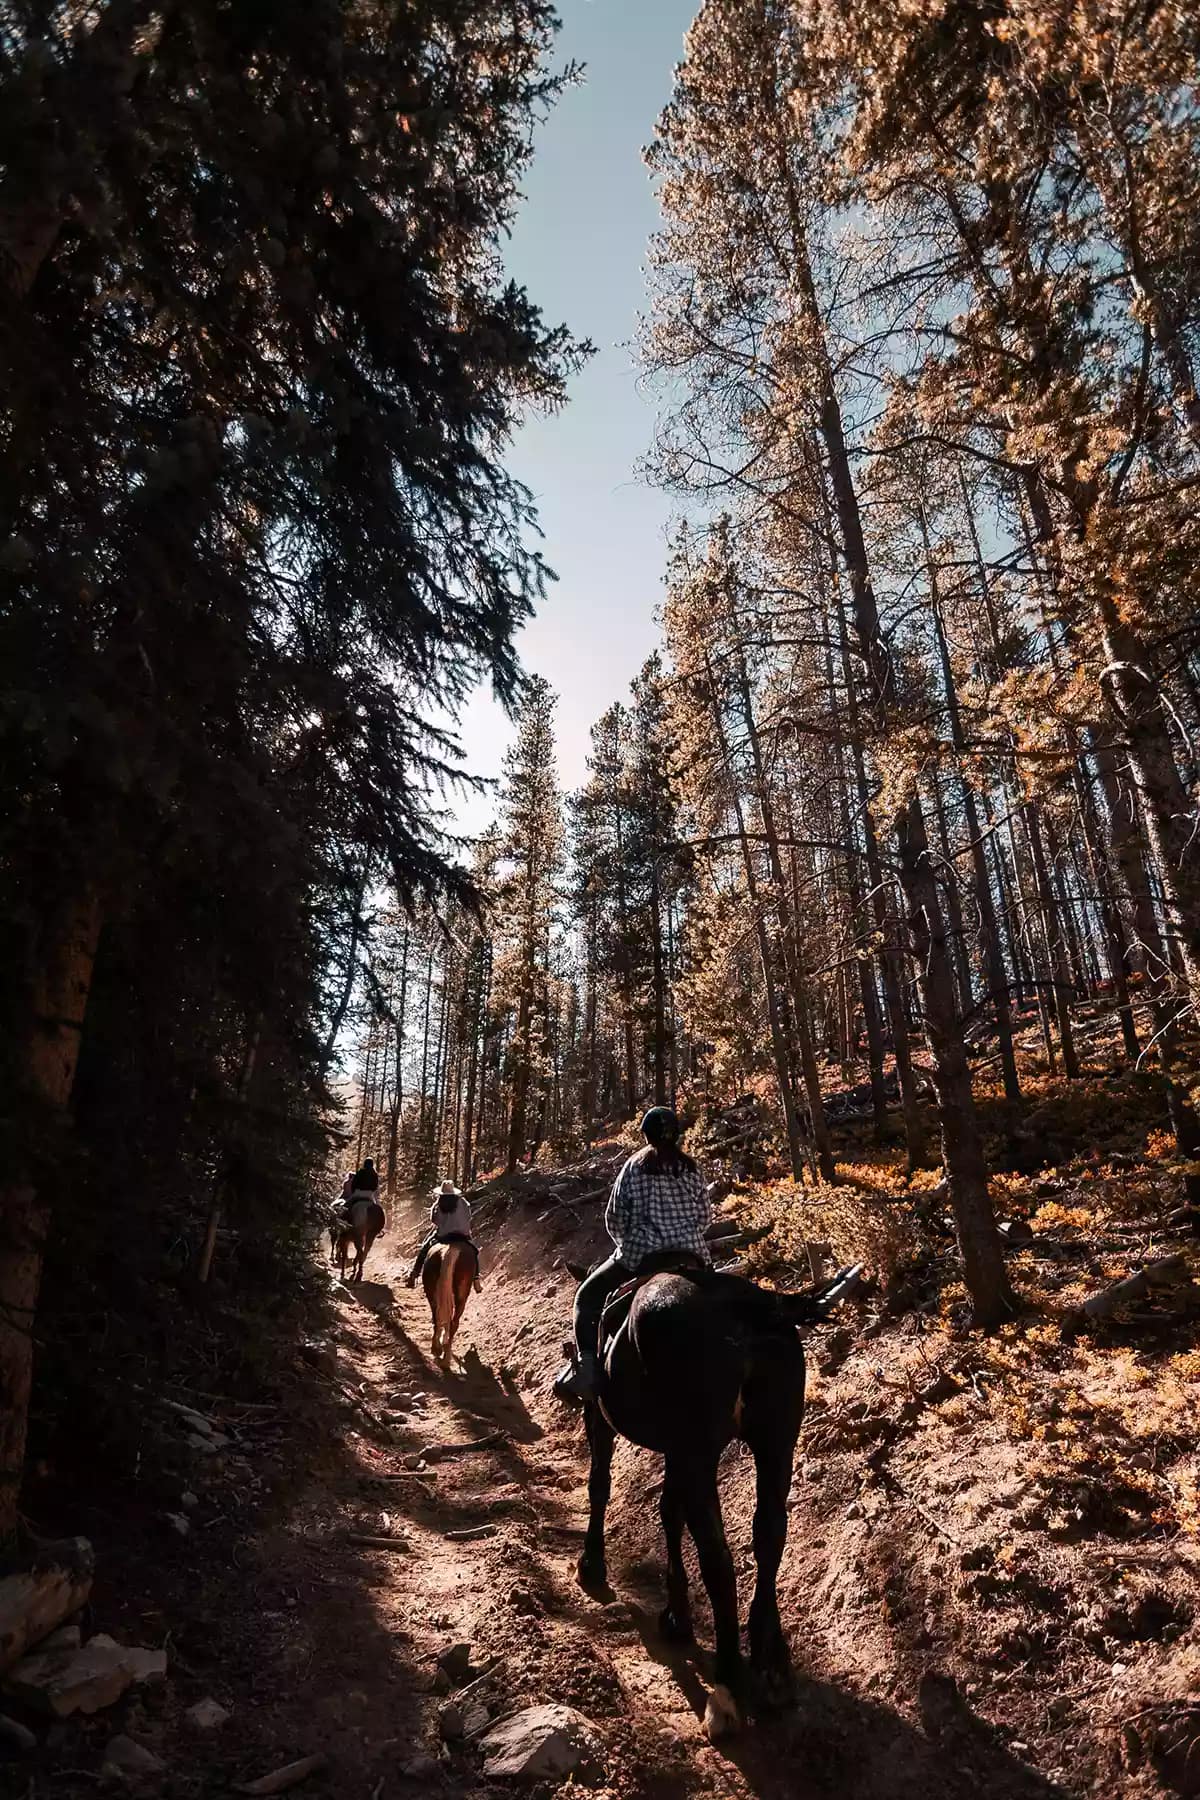 Three riders on horseback ride up a rustic trail between tall trees in rural Colorado